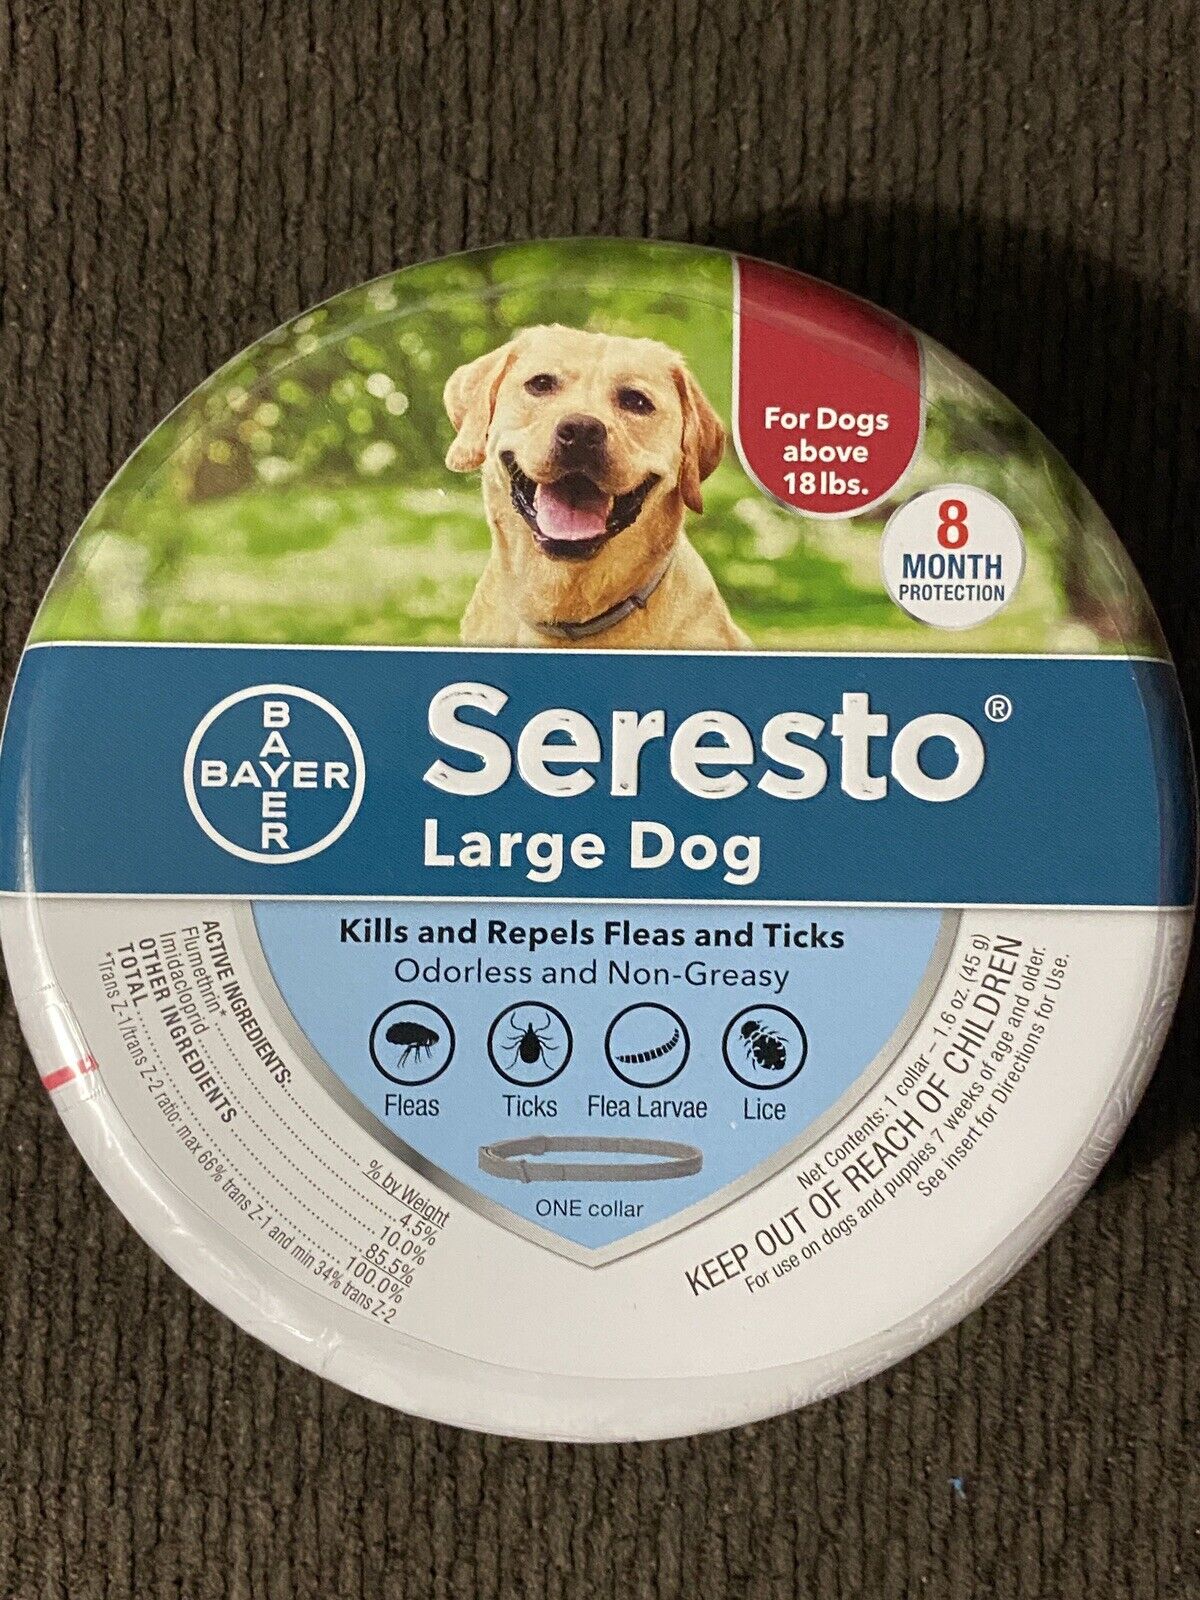 Bayer Seresto For Dogs 18lbs And above - Large Dog Authentic